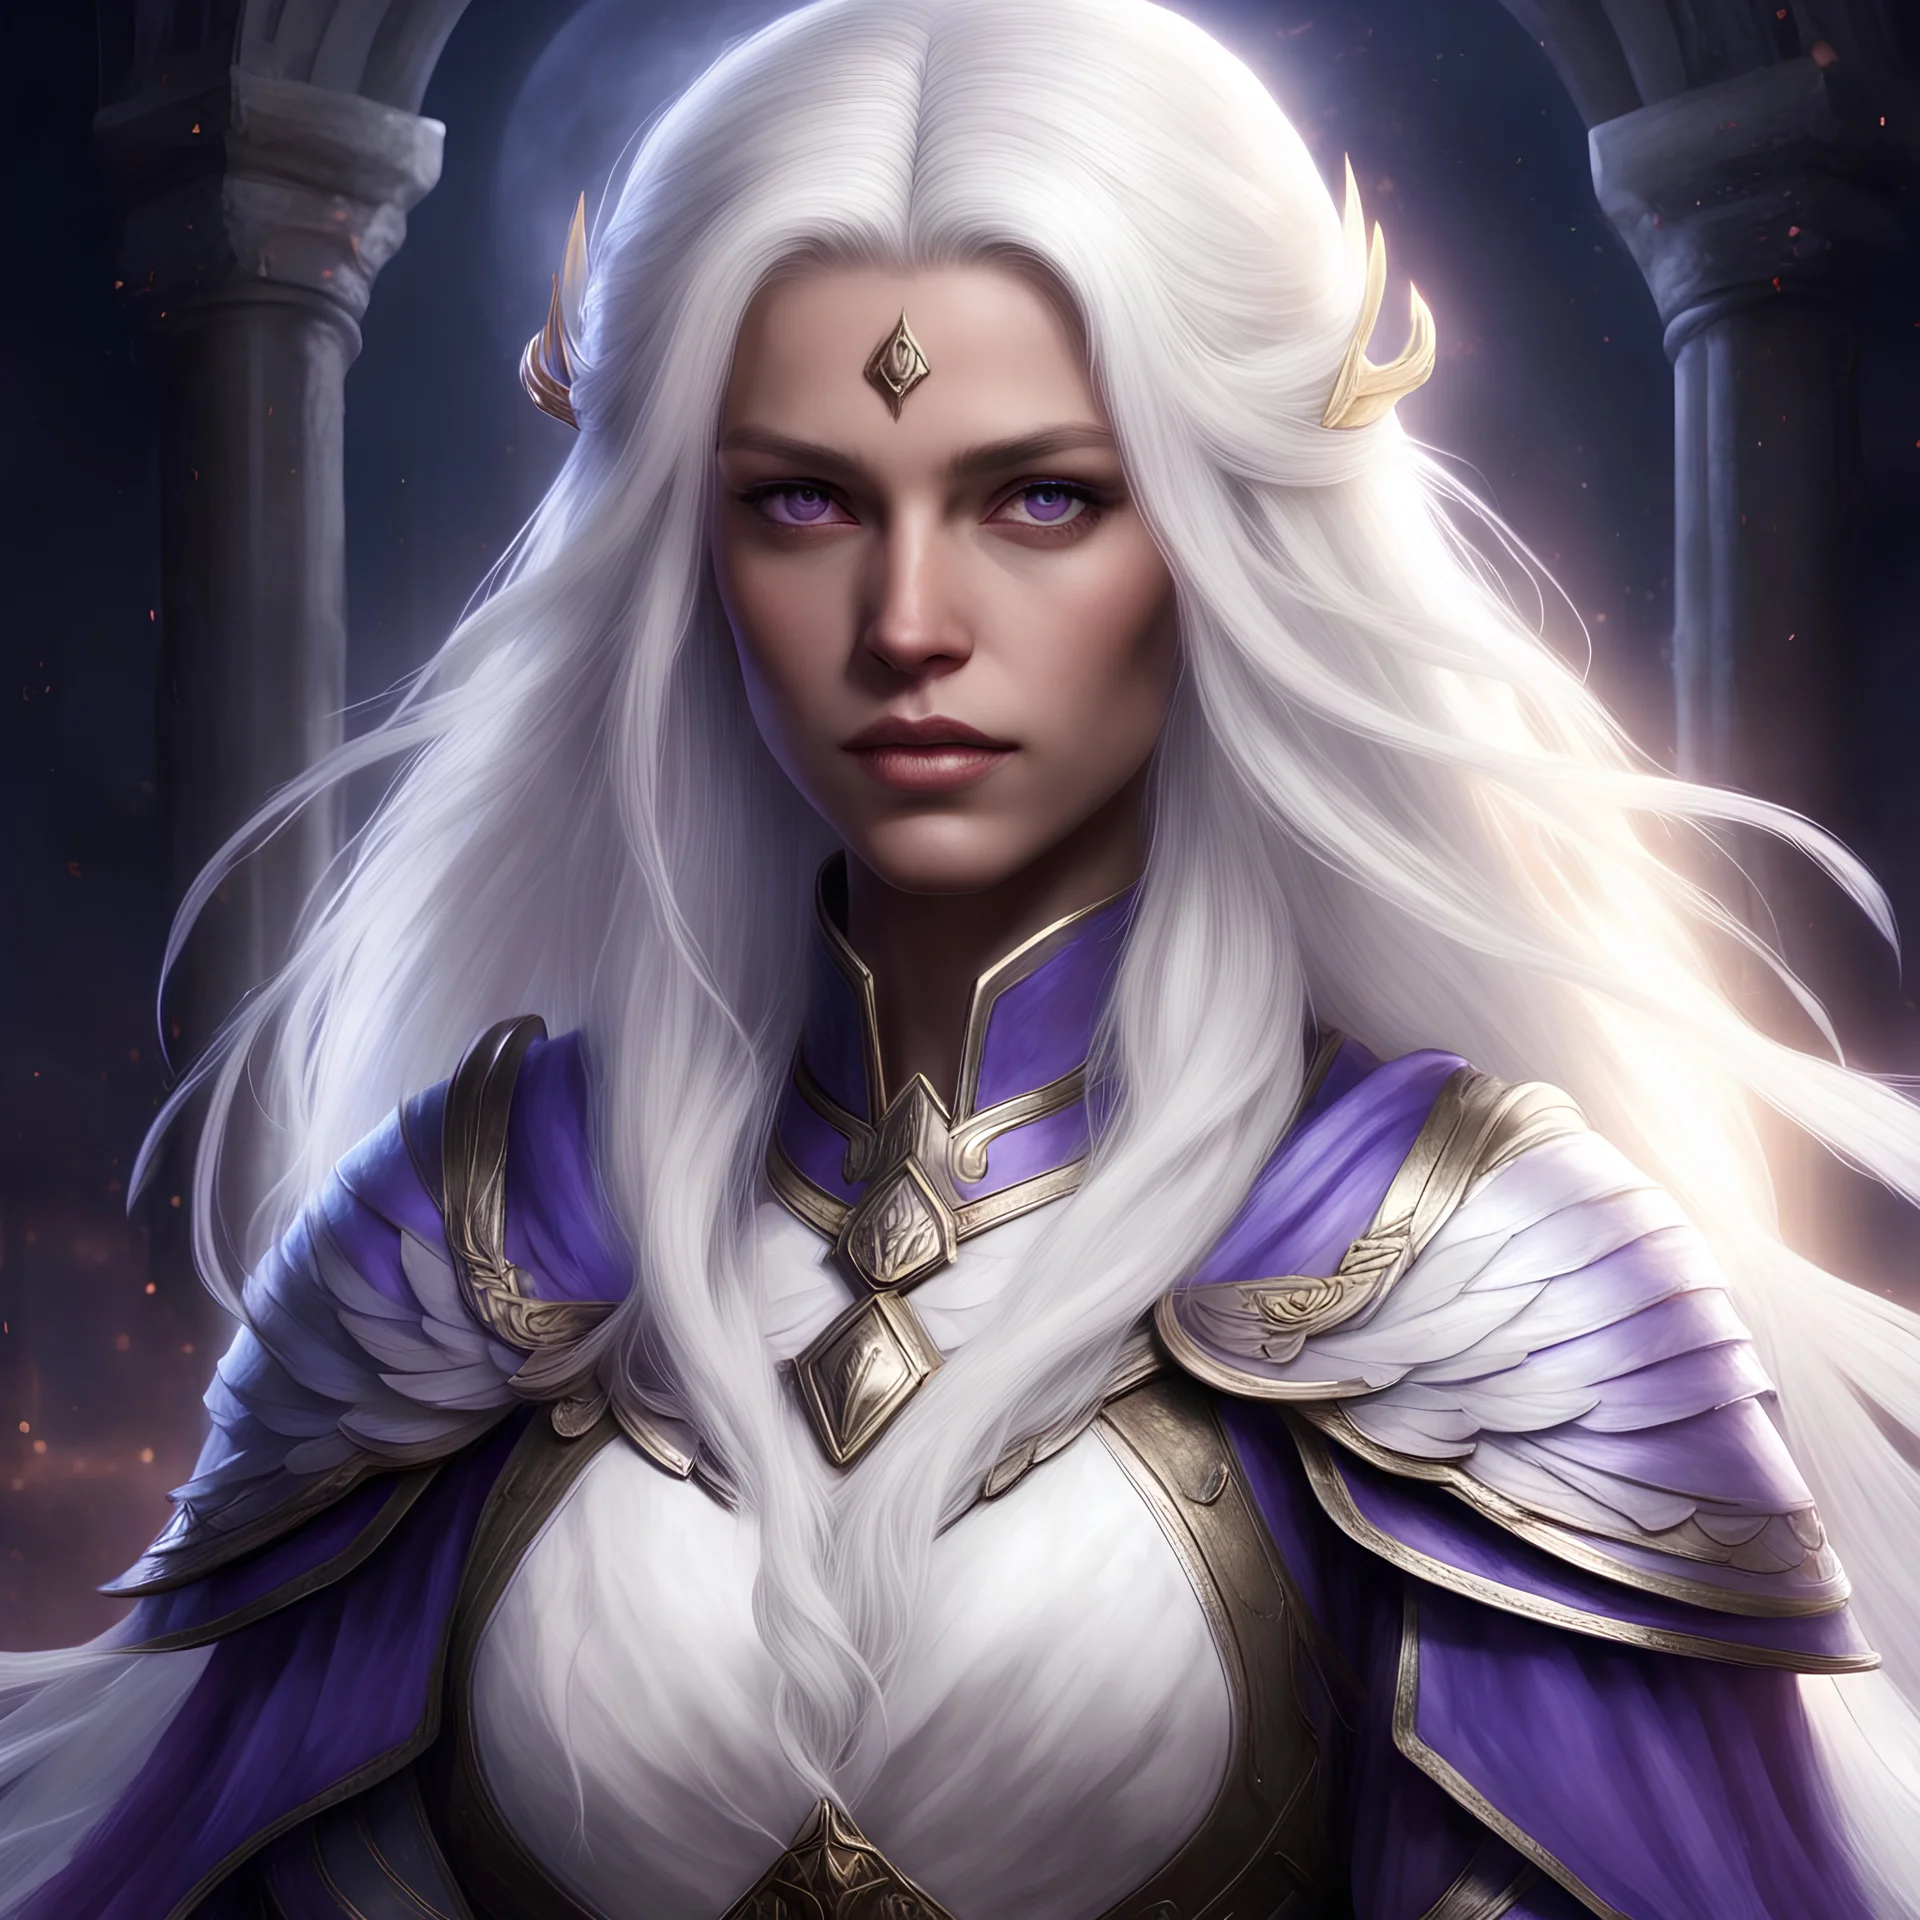 Generate a baldur's gate 3 character portrait of a beautiful female cleric aasimar blessed by the goddess Selune. She has long white hair. She has purple eyes. She has some white feathers in the lower part of her long hair. She has a youthful and rounder face. She is lit by moonlight.